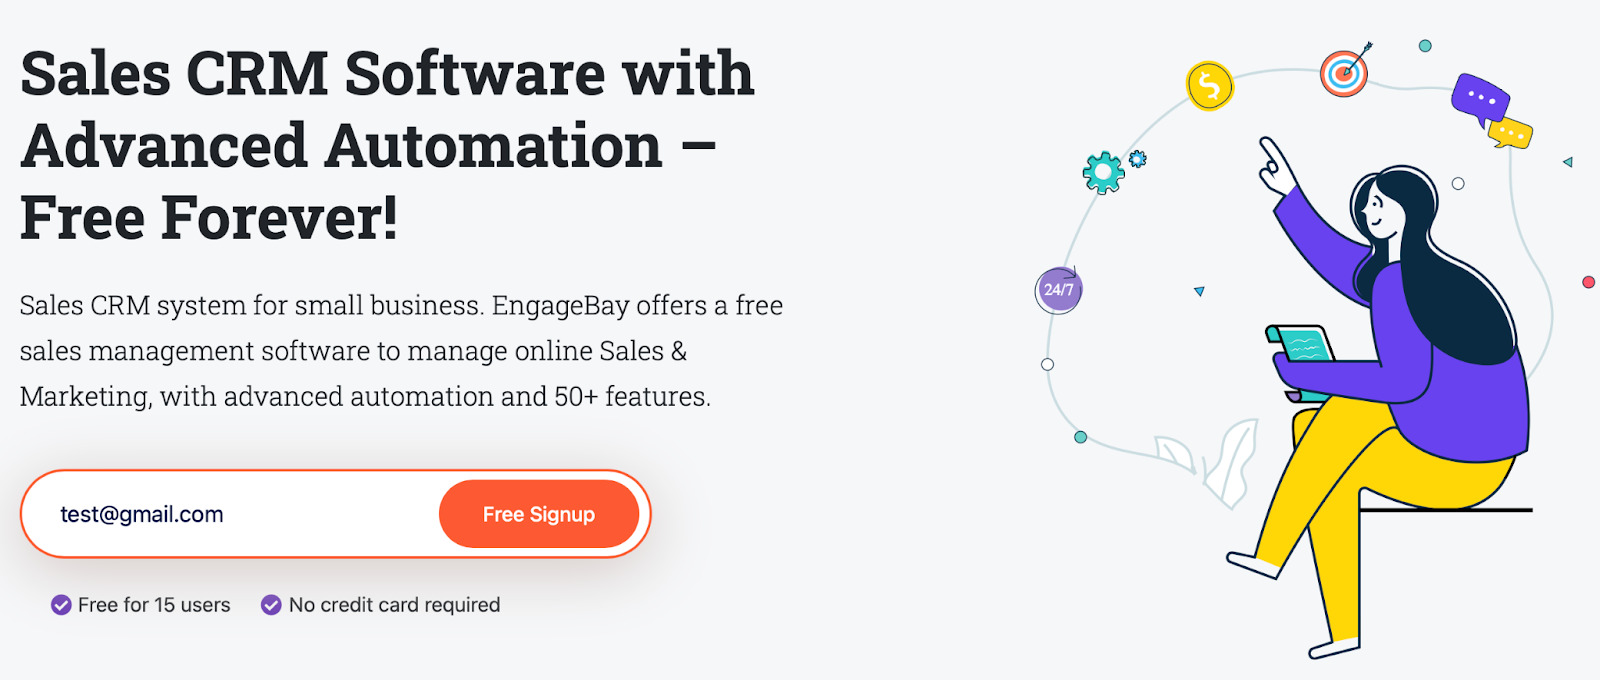 EngageBay as a lead scoring software